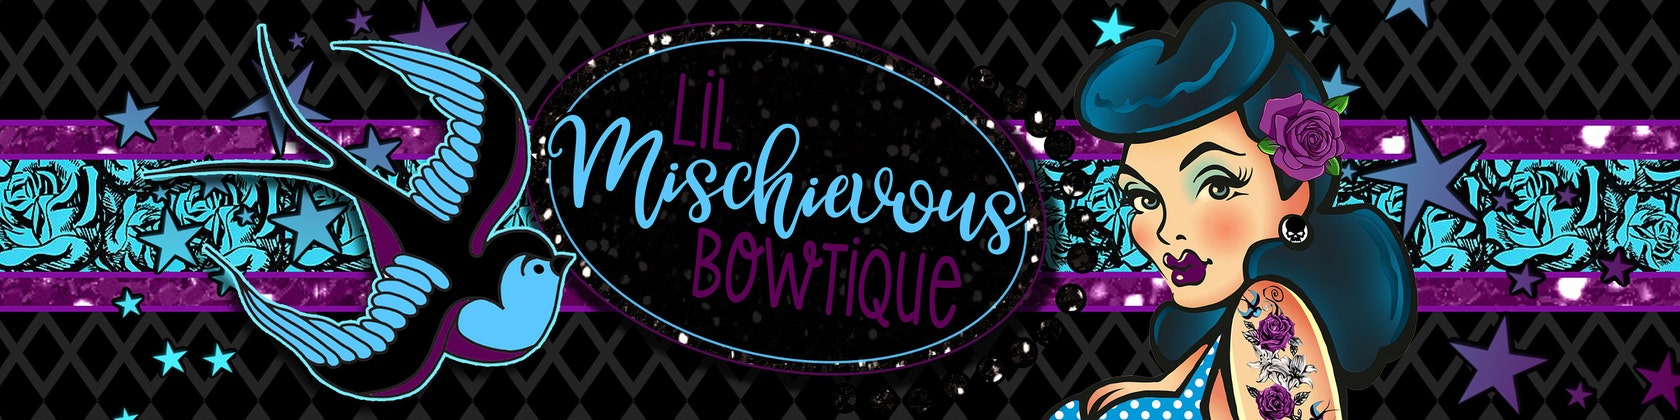 Lil' Mischievous Bowtique by LilMischievous on Etsy